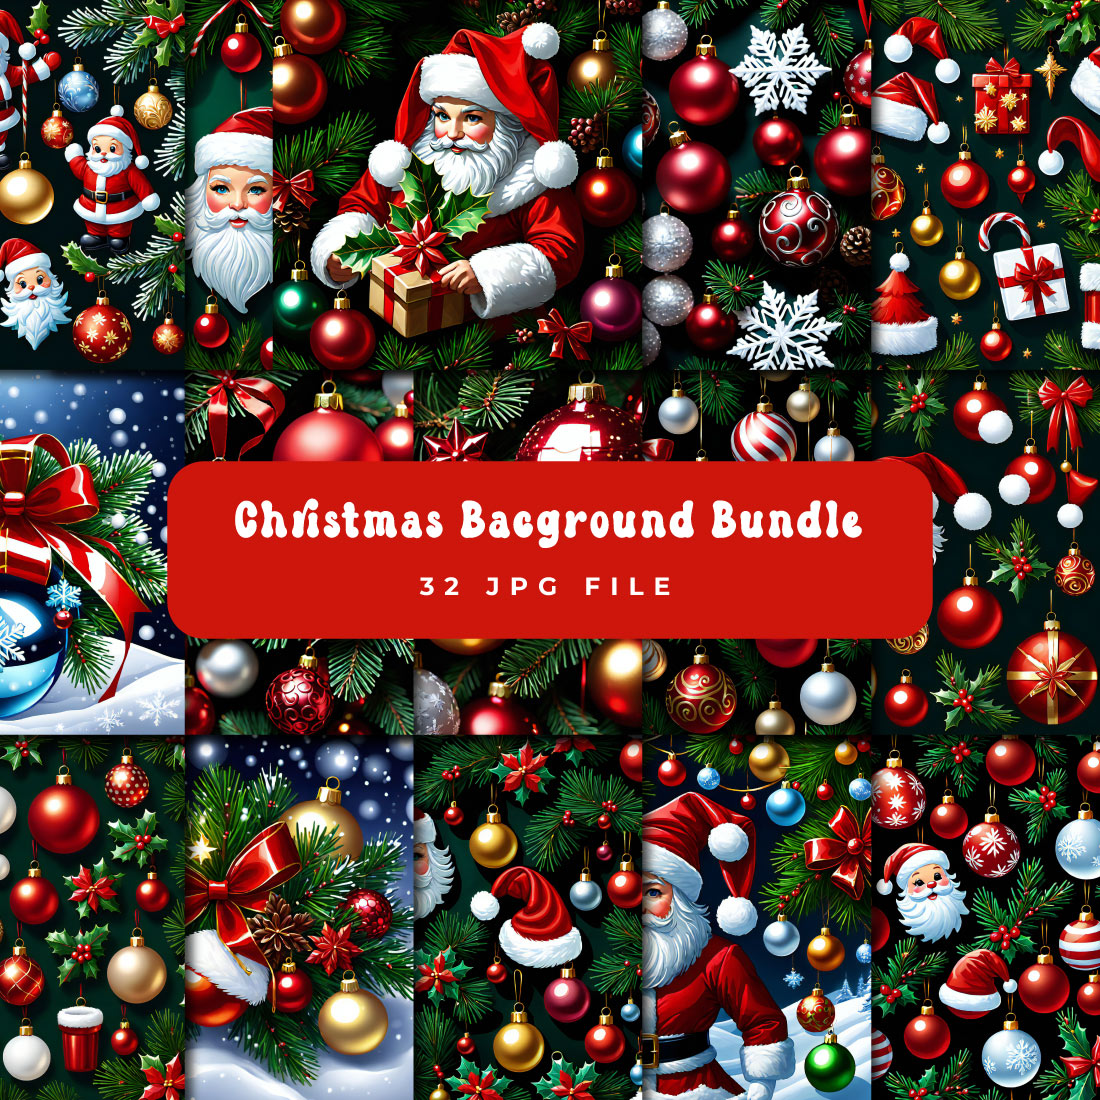 Merry Christmas Background Bundle cover image.